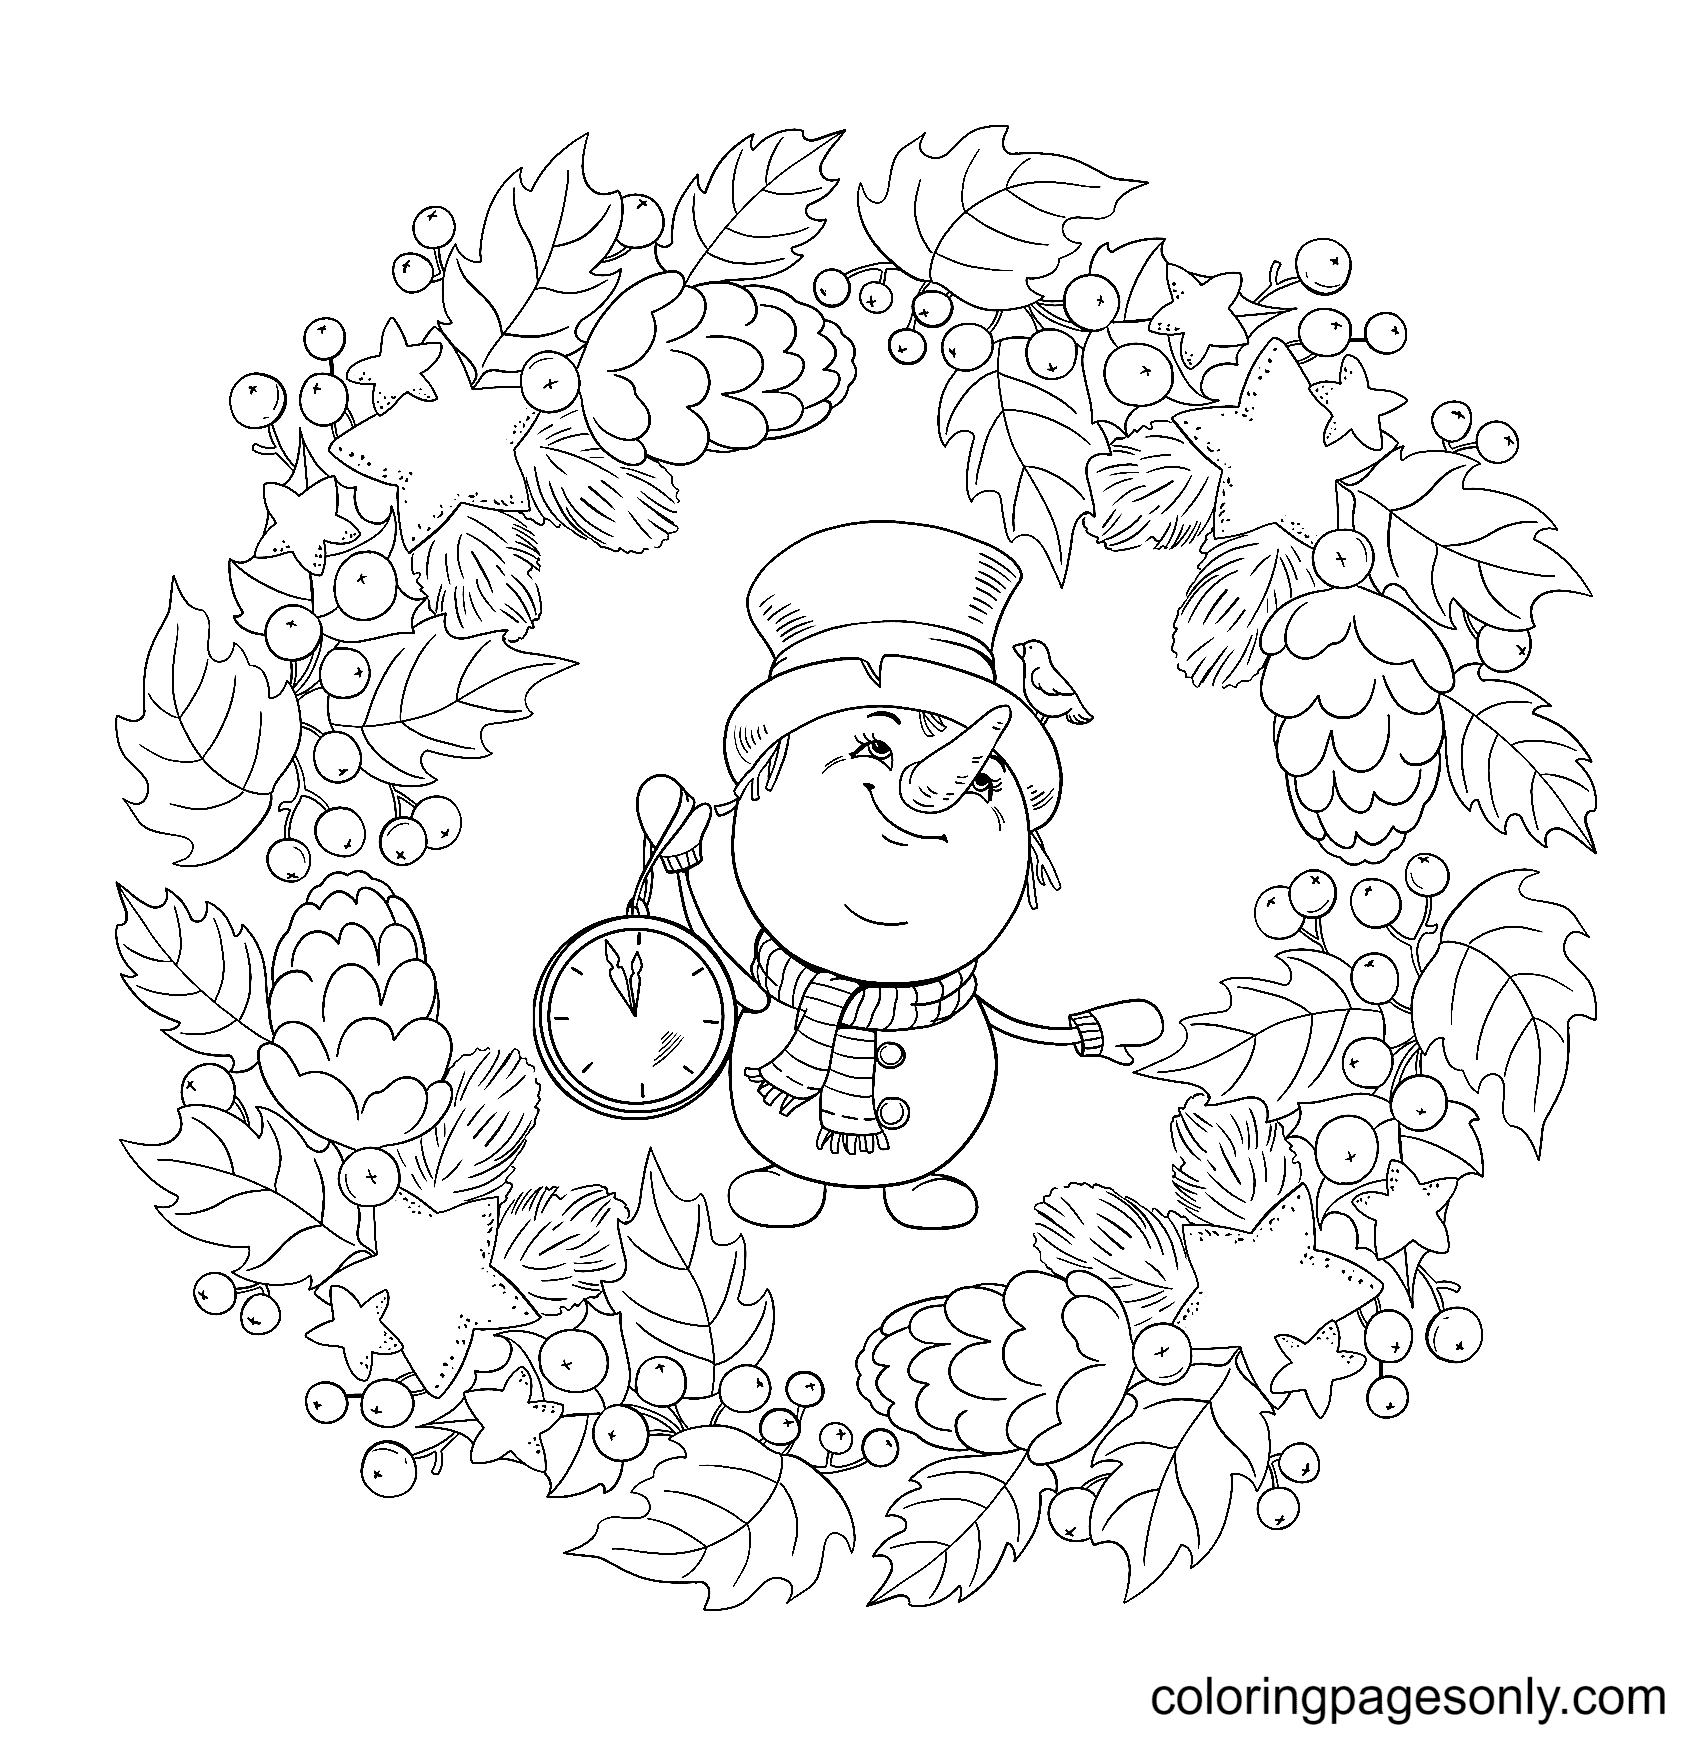 Mandala with a Snowman Holding a Clock Coloring Page